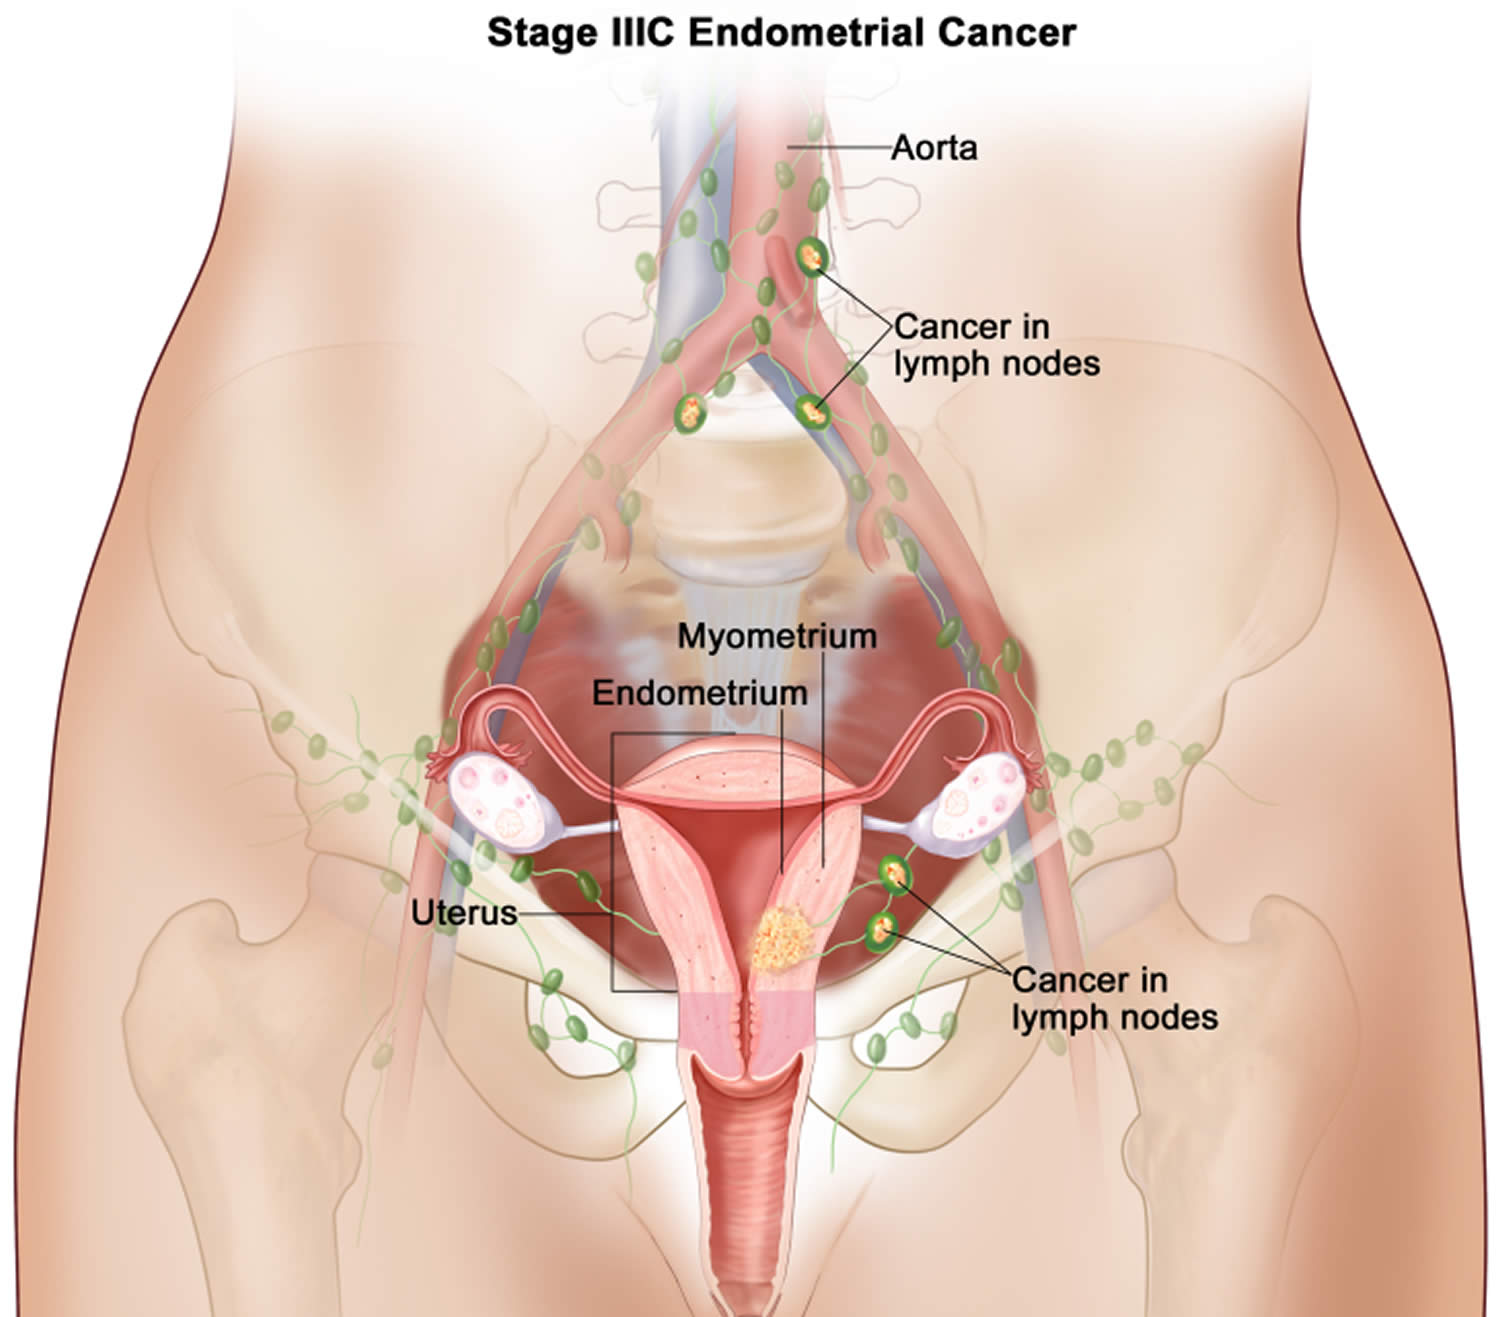 Stage 3C endometrial cancer